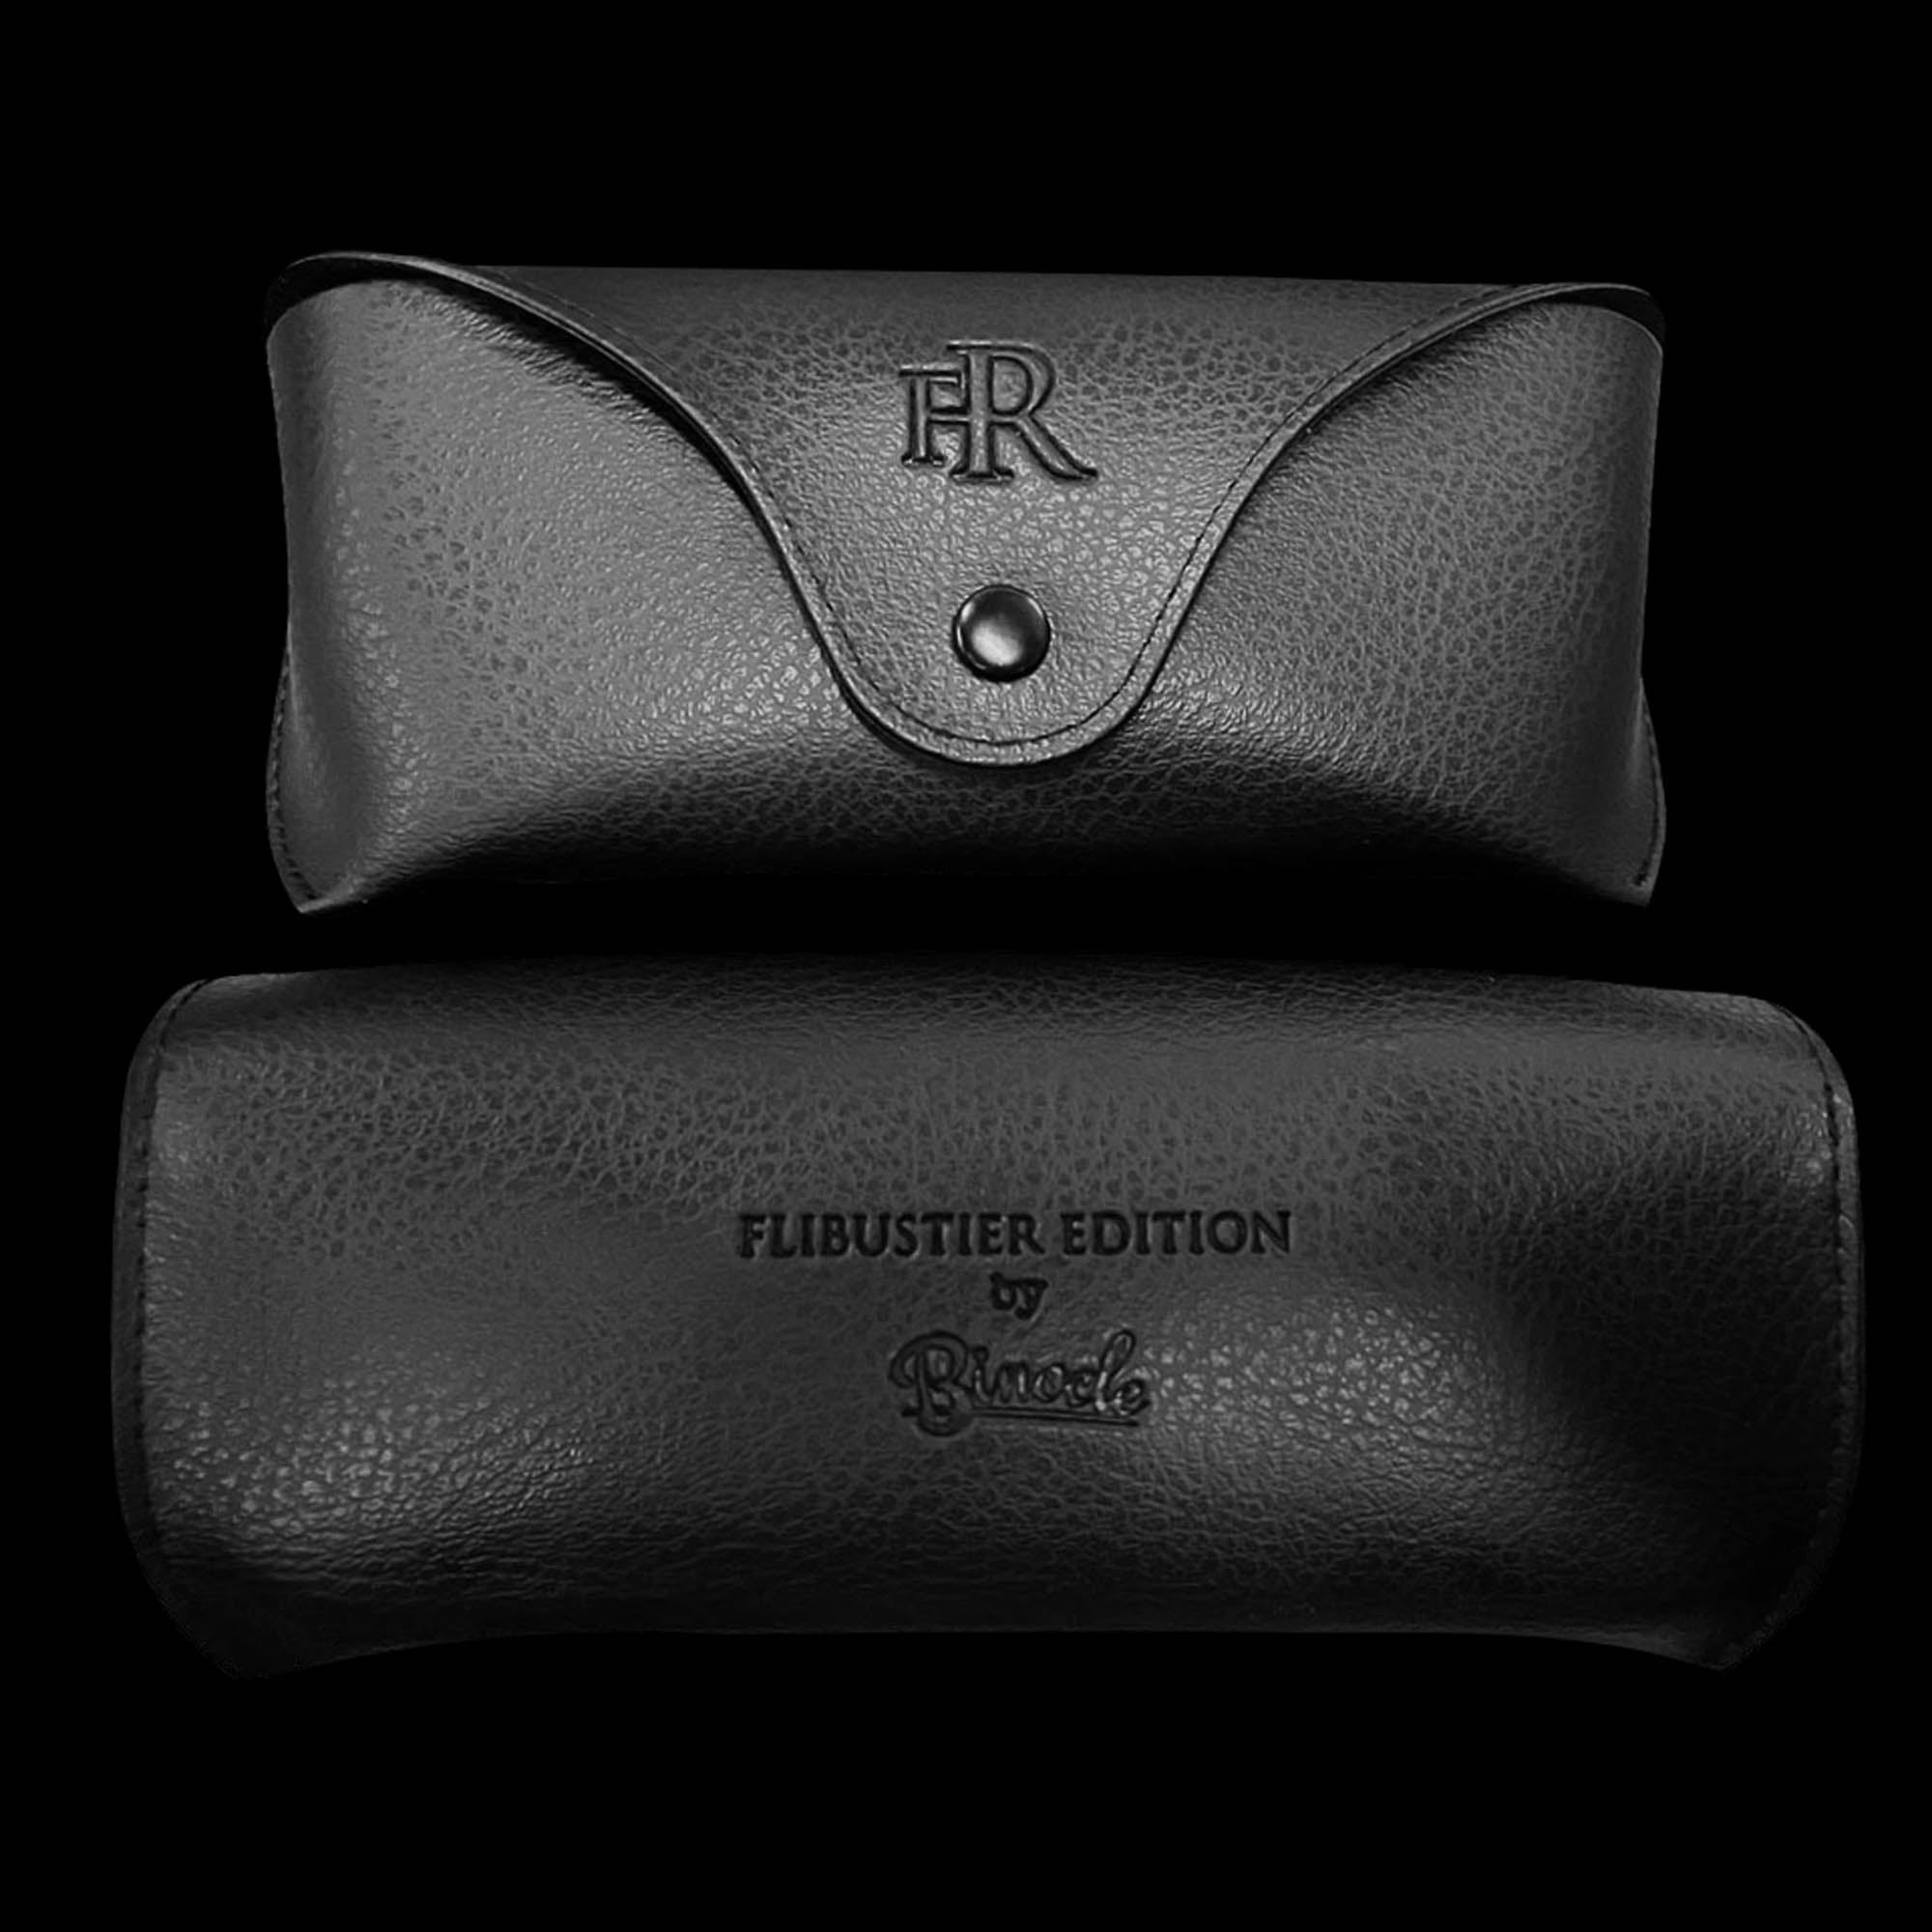 1st edition Ad Petram shades by Flibustier X Binocle - limited edition